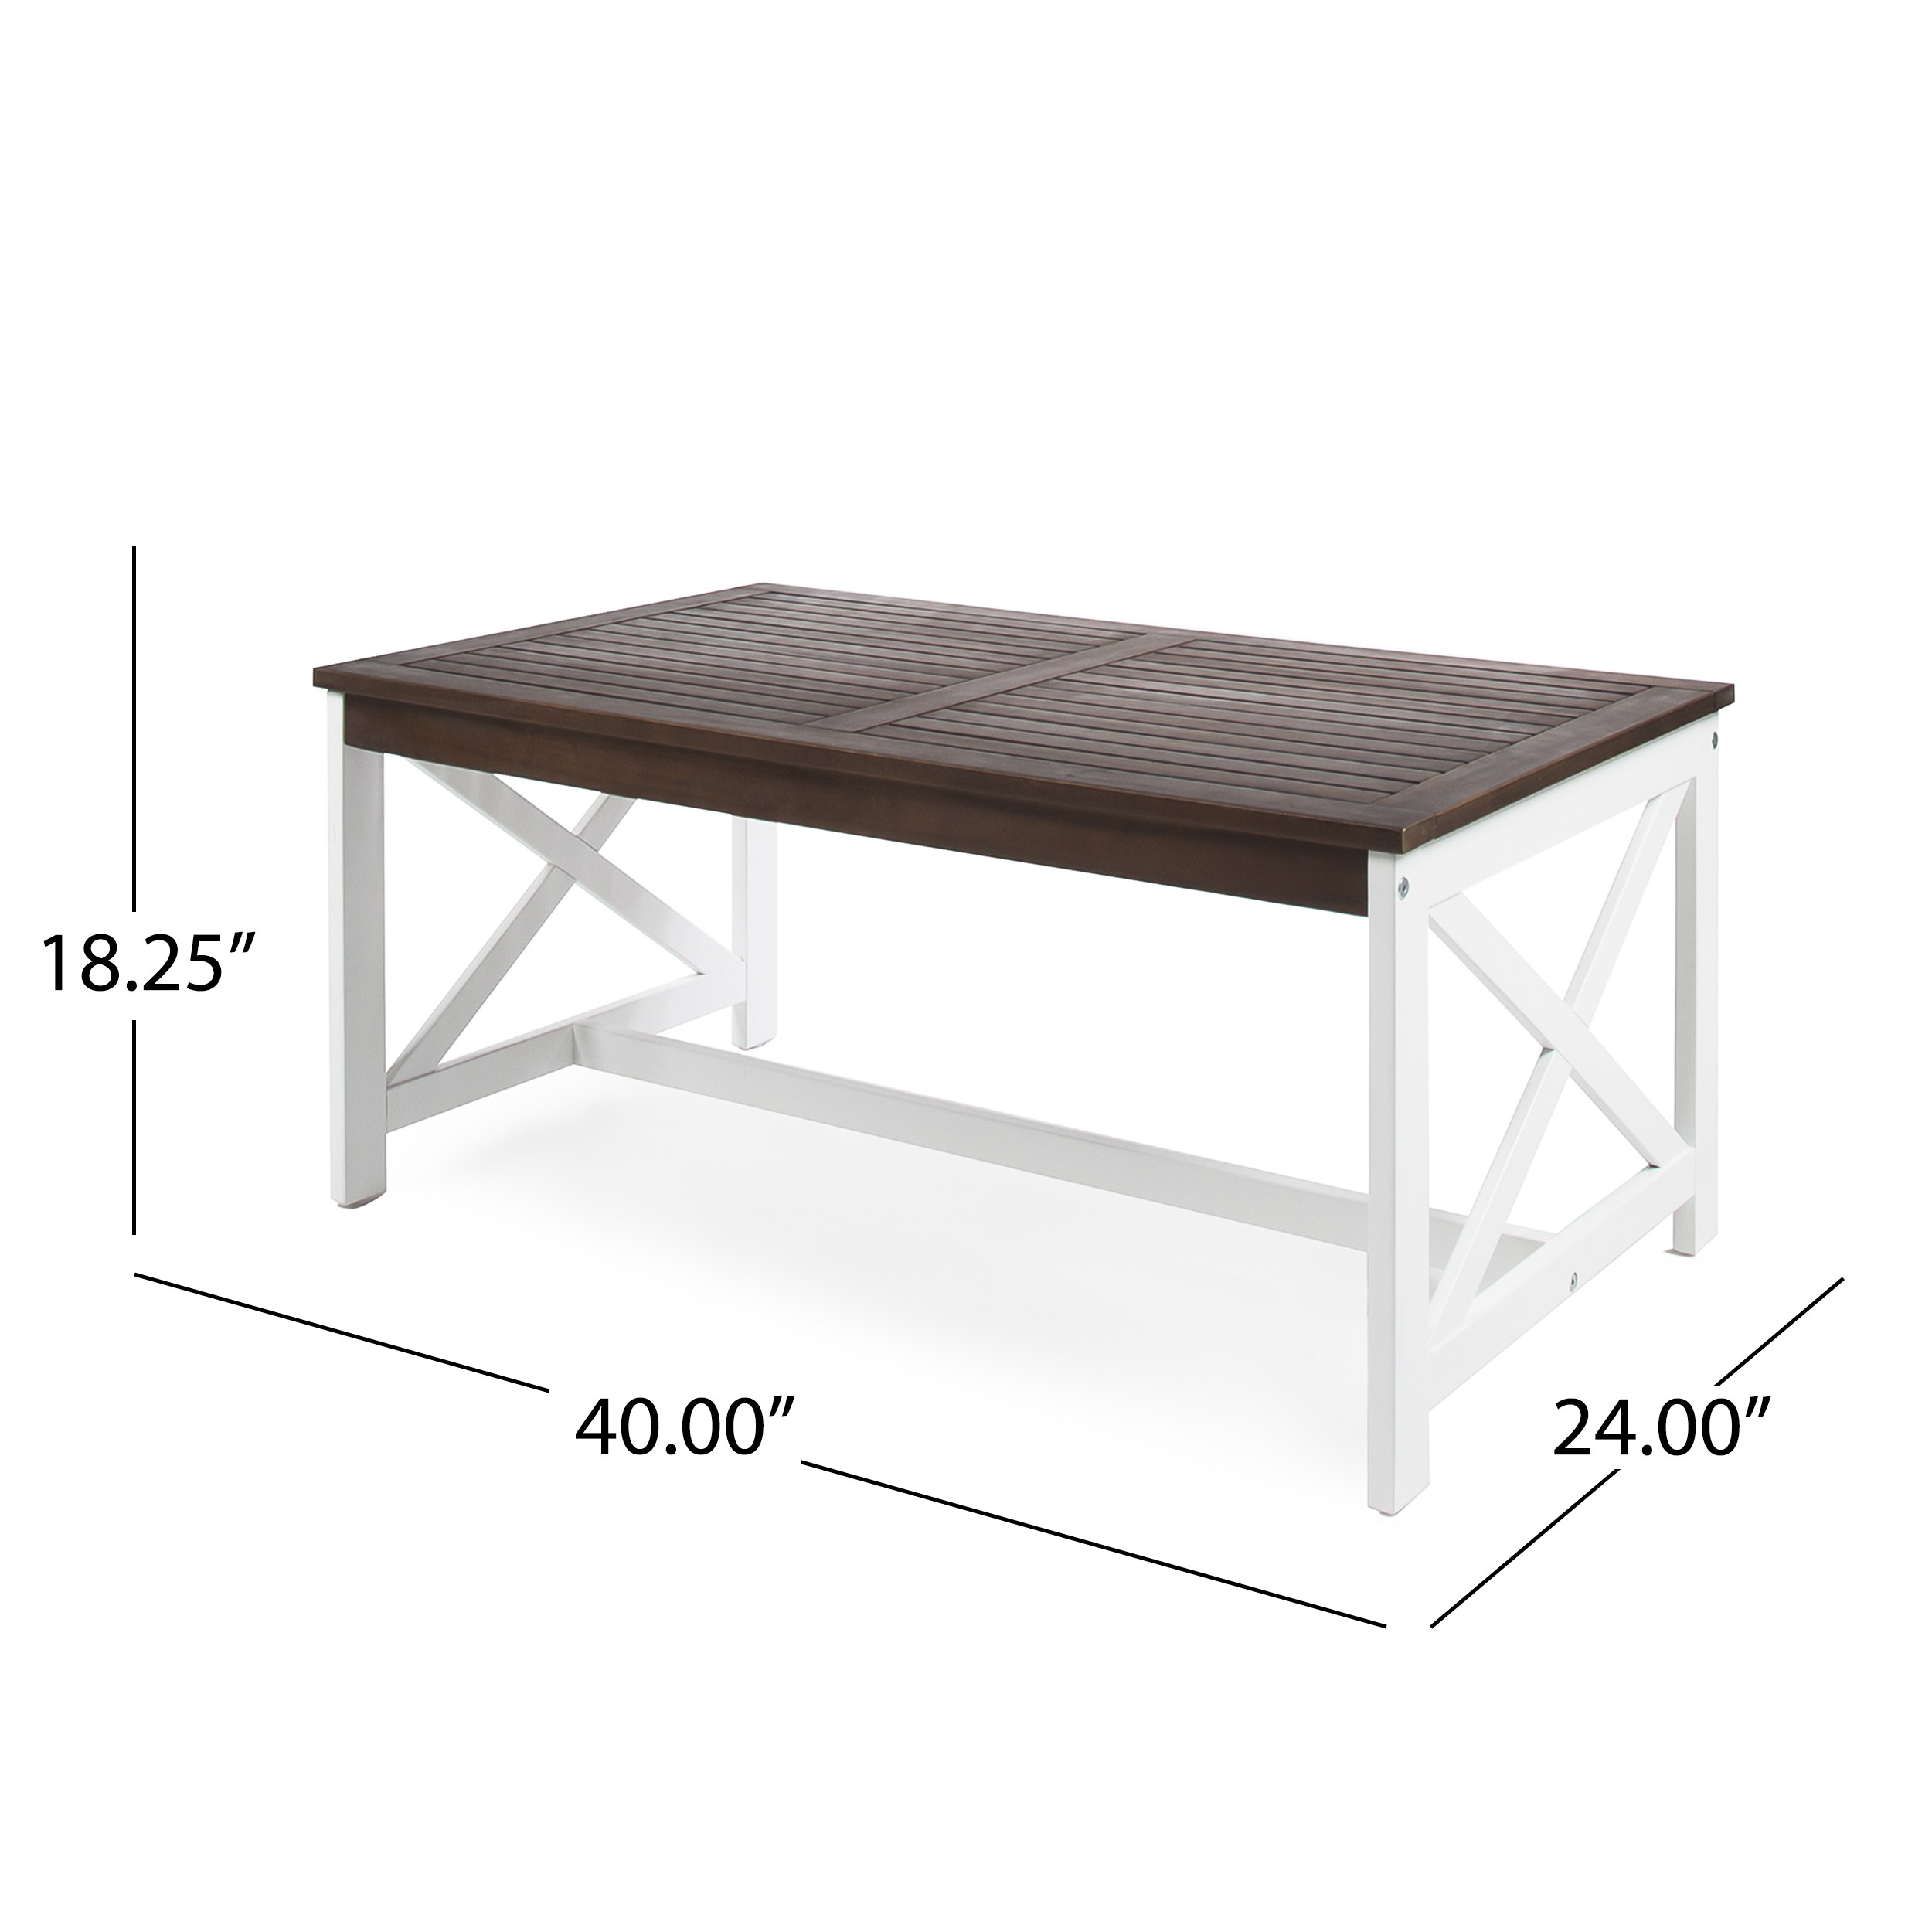 Ismus Outdoor Acacia Wood Coffee Table with a White Base, Dark Brown - image 4 of 9